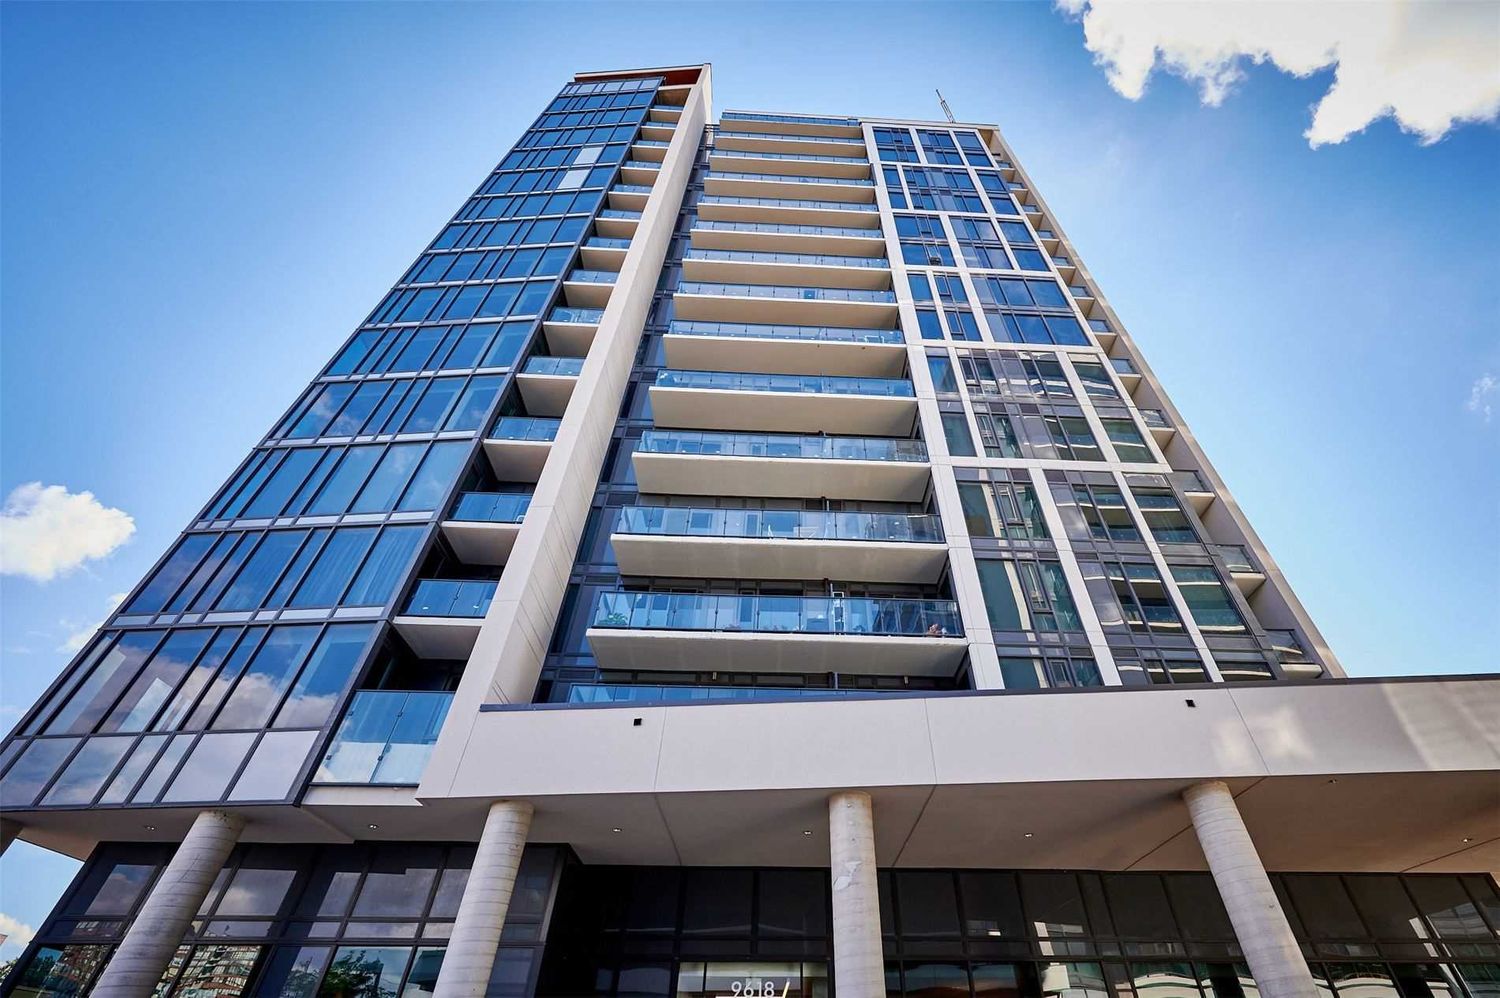 9618 Yonge Street. Grand Palace Condos is located in  Richmond Hill, Toronto - image #3 of 3